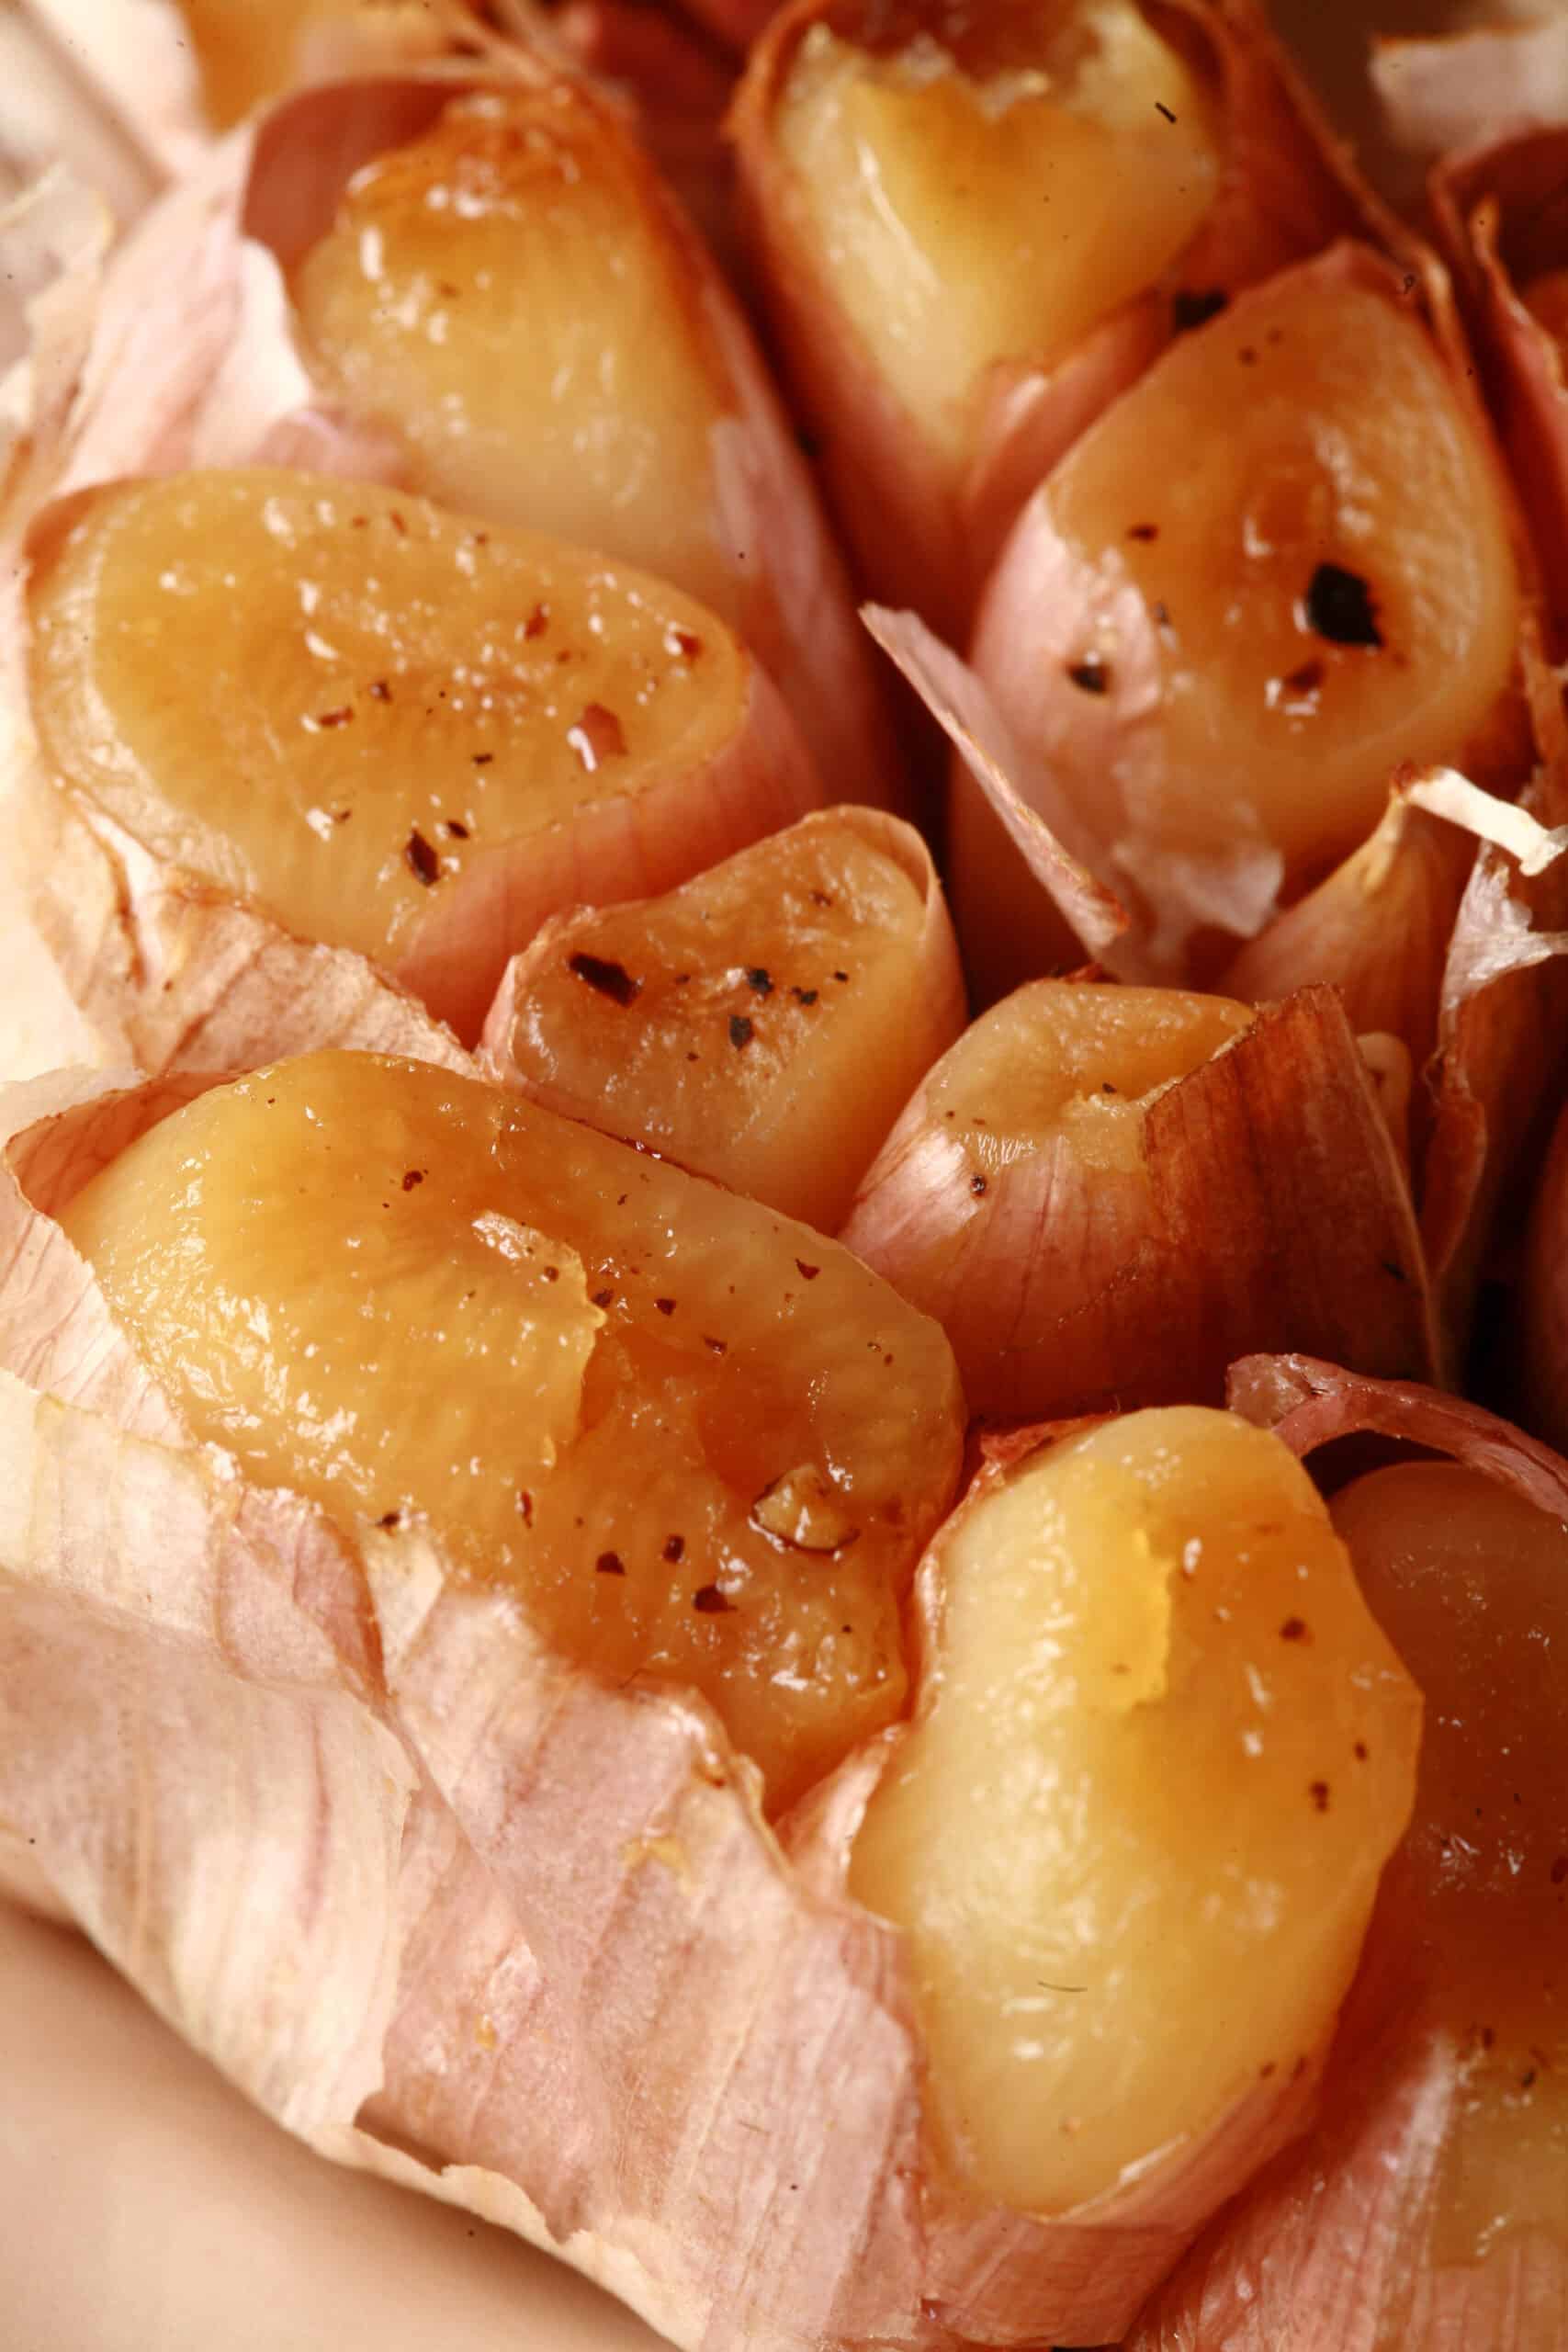 A close up photo of a bulb of roasted garlic.